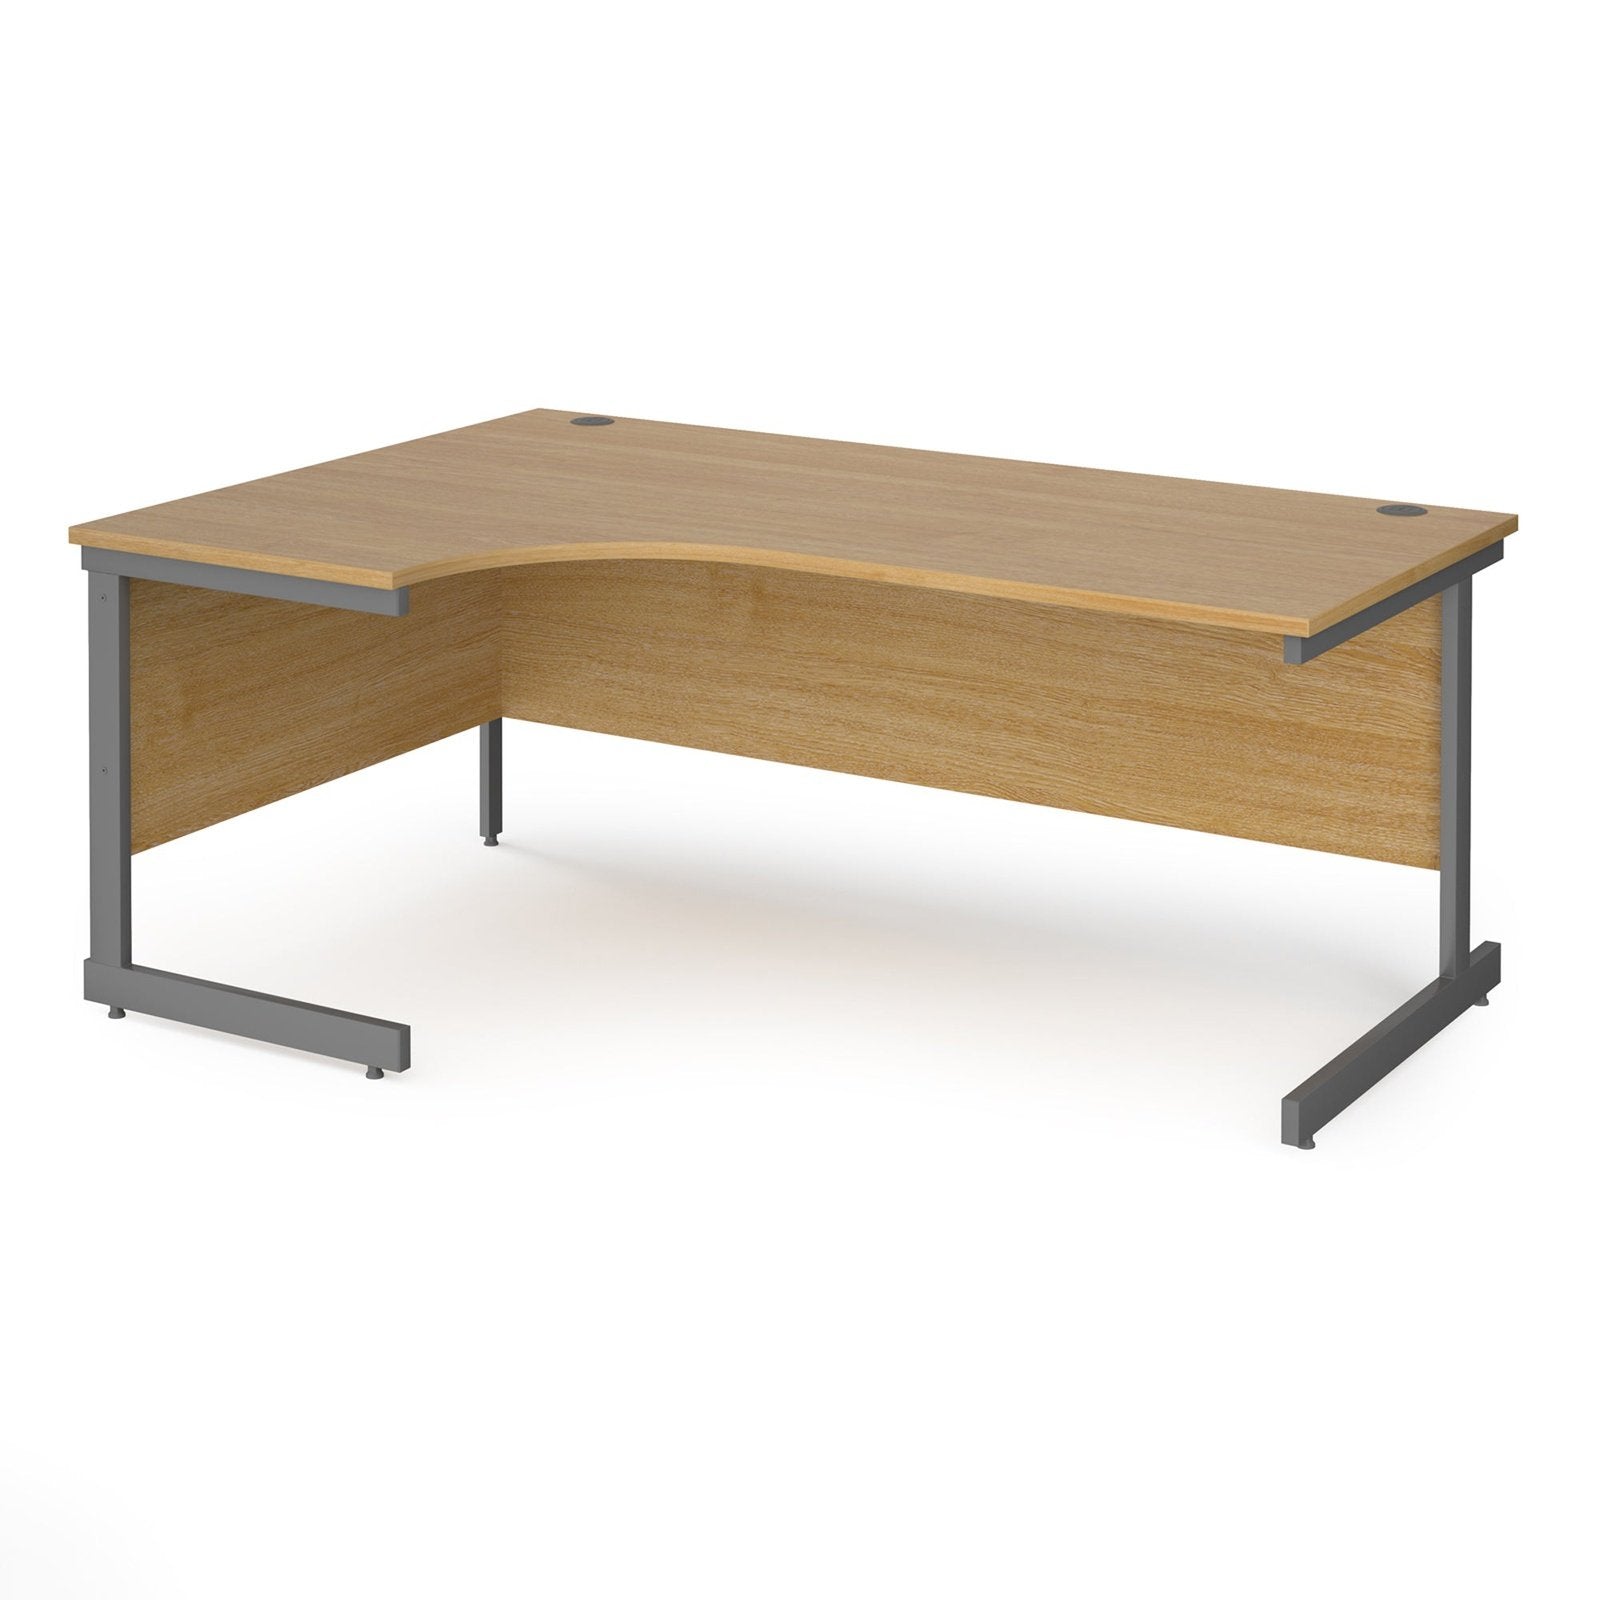 Contract 25 left hand ergonomic desk with cantilever leg - Office Products Online